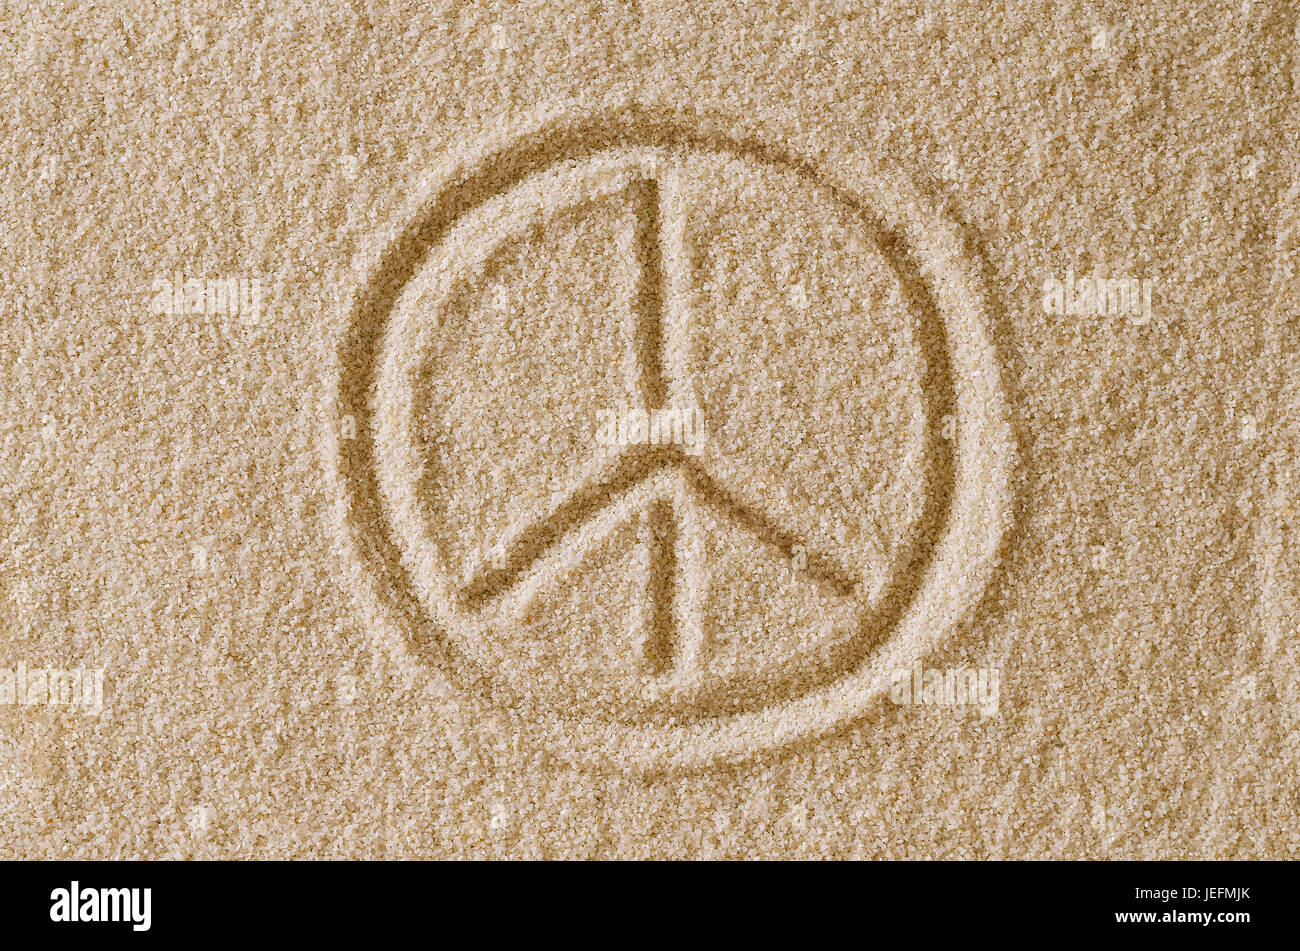 Peace Sign drawn in sand. Imprint and shape of the Pace Symbol in ocher grains of sand. Also a symbol for antiwar, love and counterculture. Stock Photo